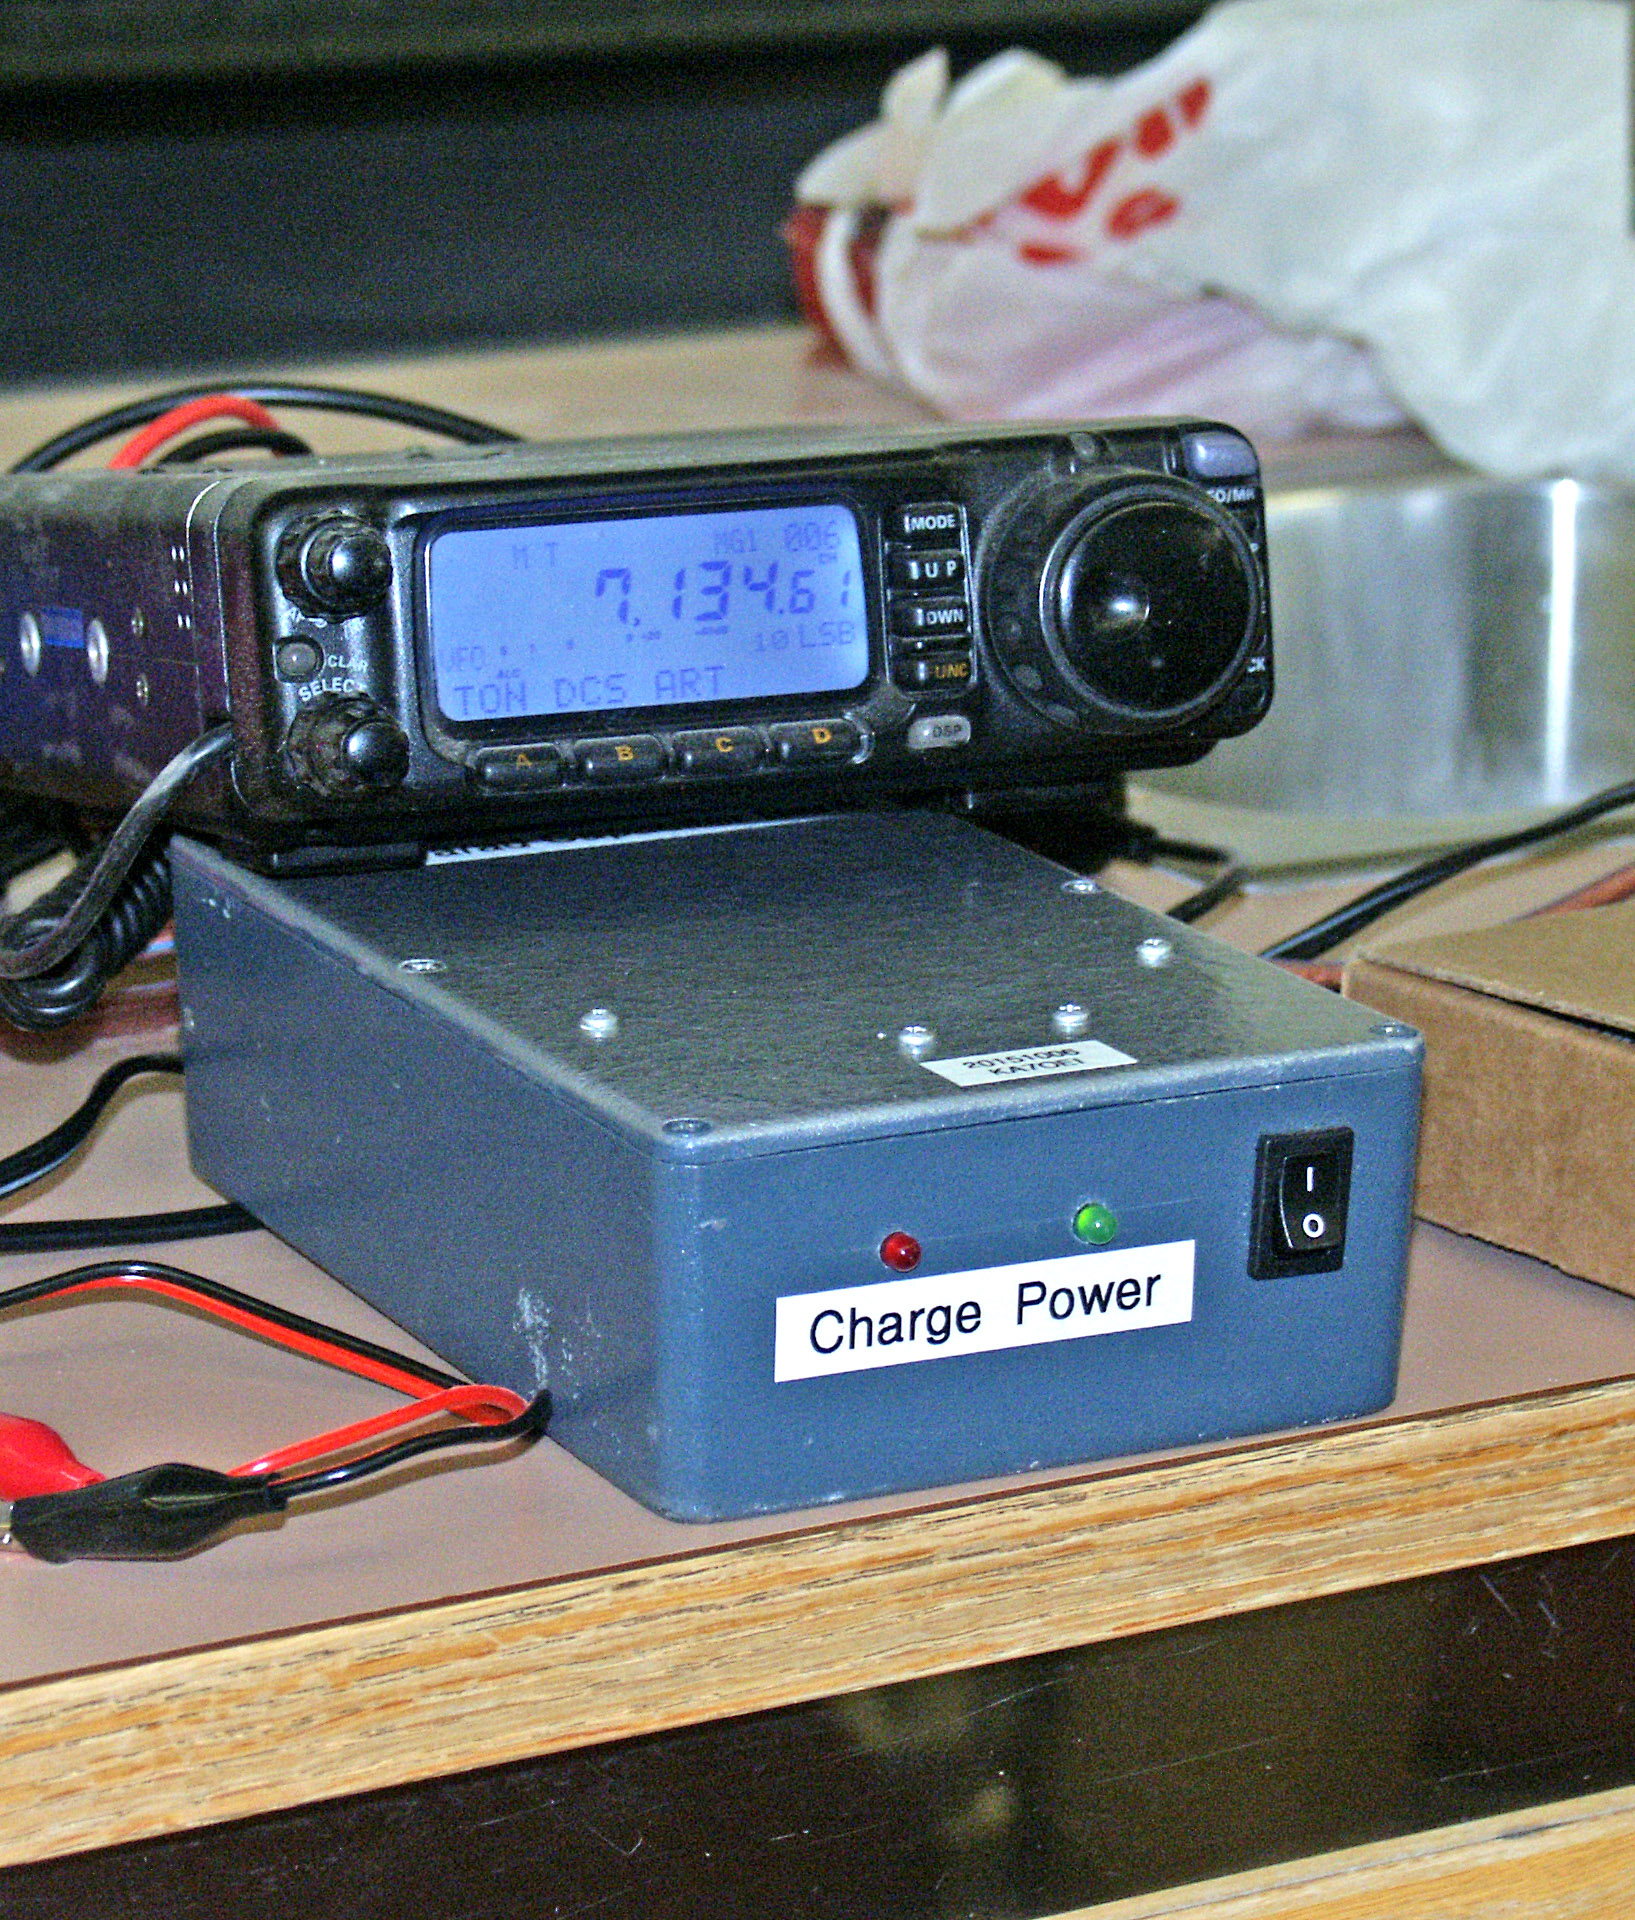 Metal box with
 power switch, pilot lights, and “Charge Power” label